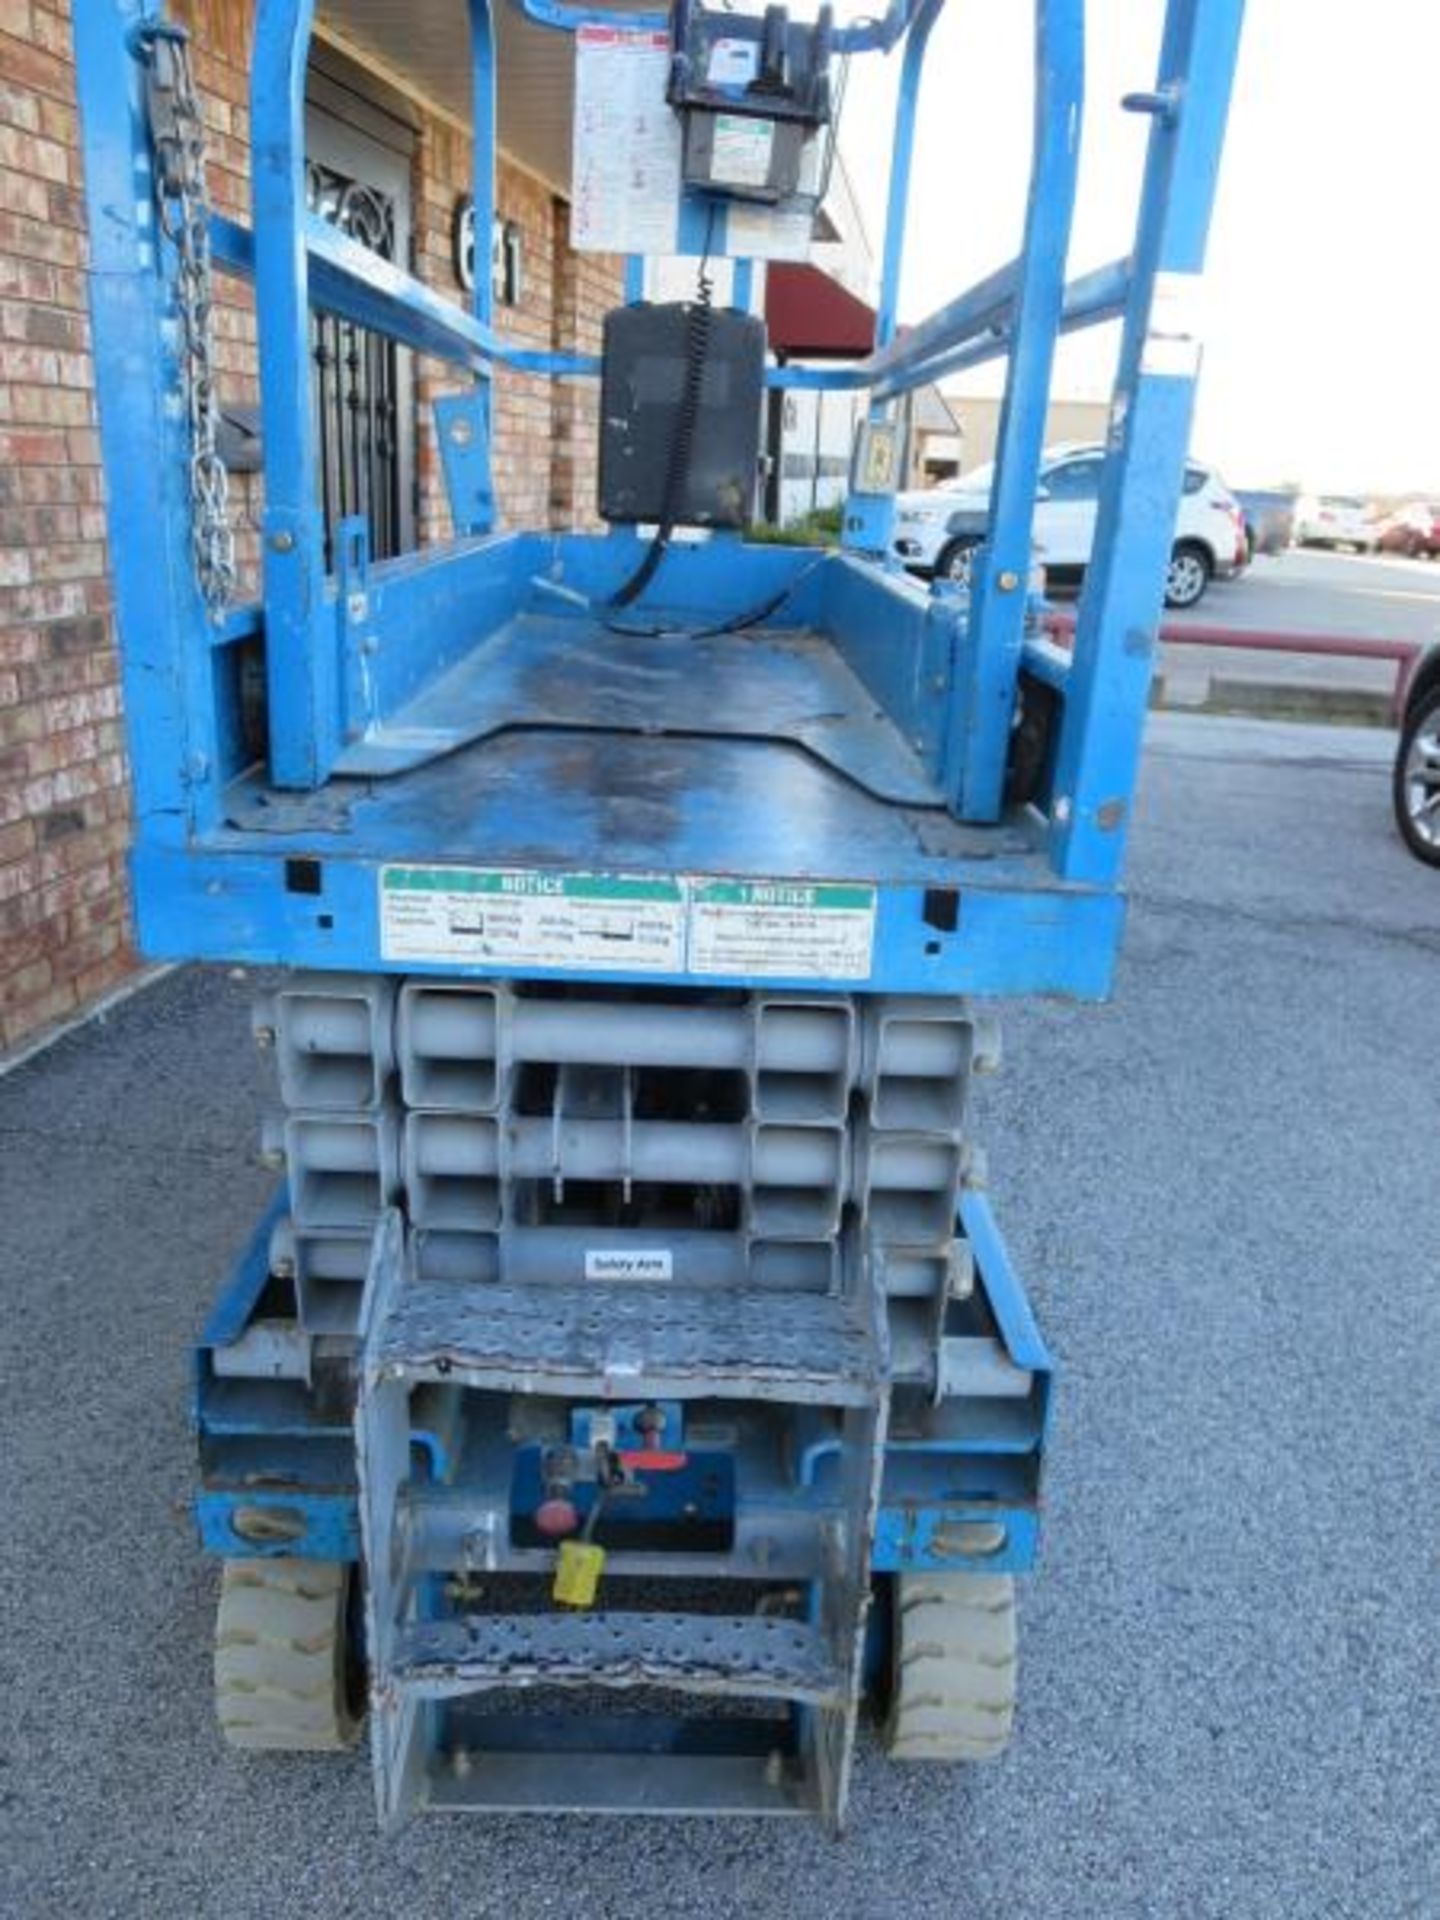 Genie GS-1930 Scissor Lift, 500 lb. capacity, Platform Max. Height 15ft. Max working height 21ft. - Image 10 of 10